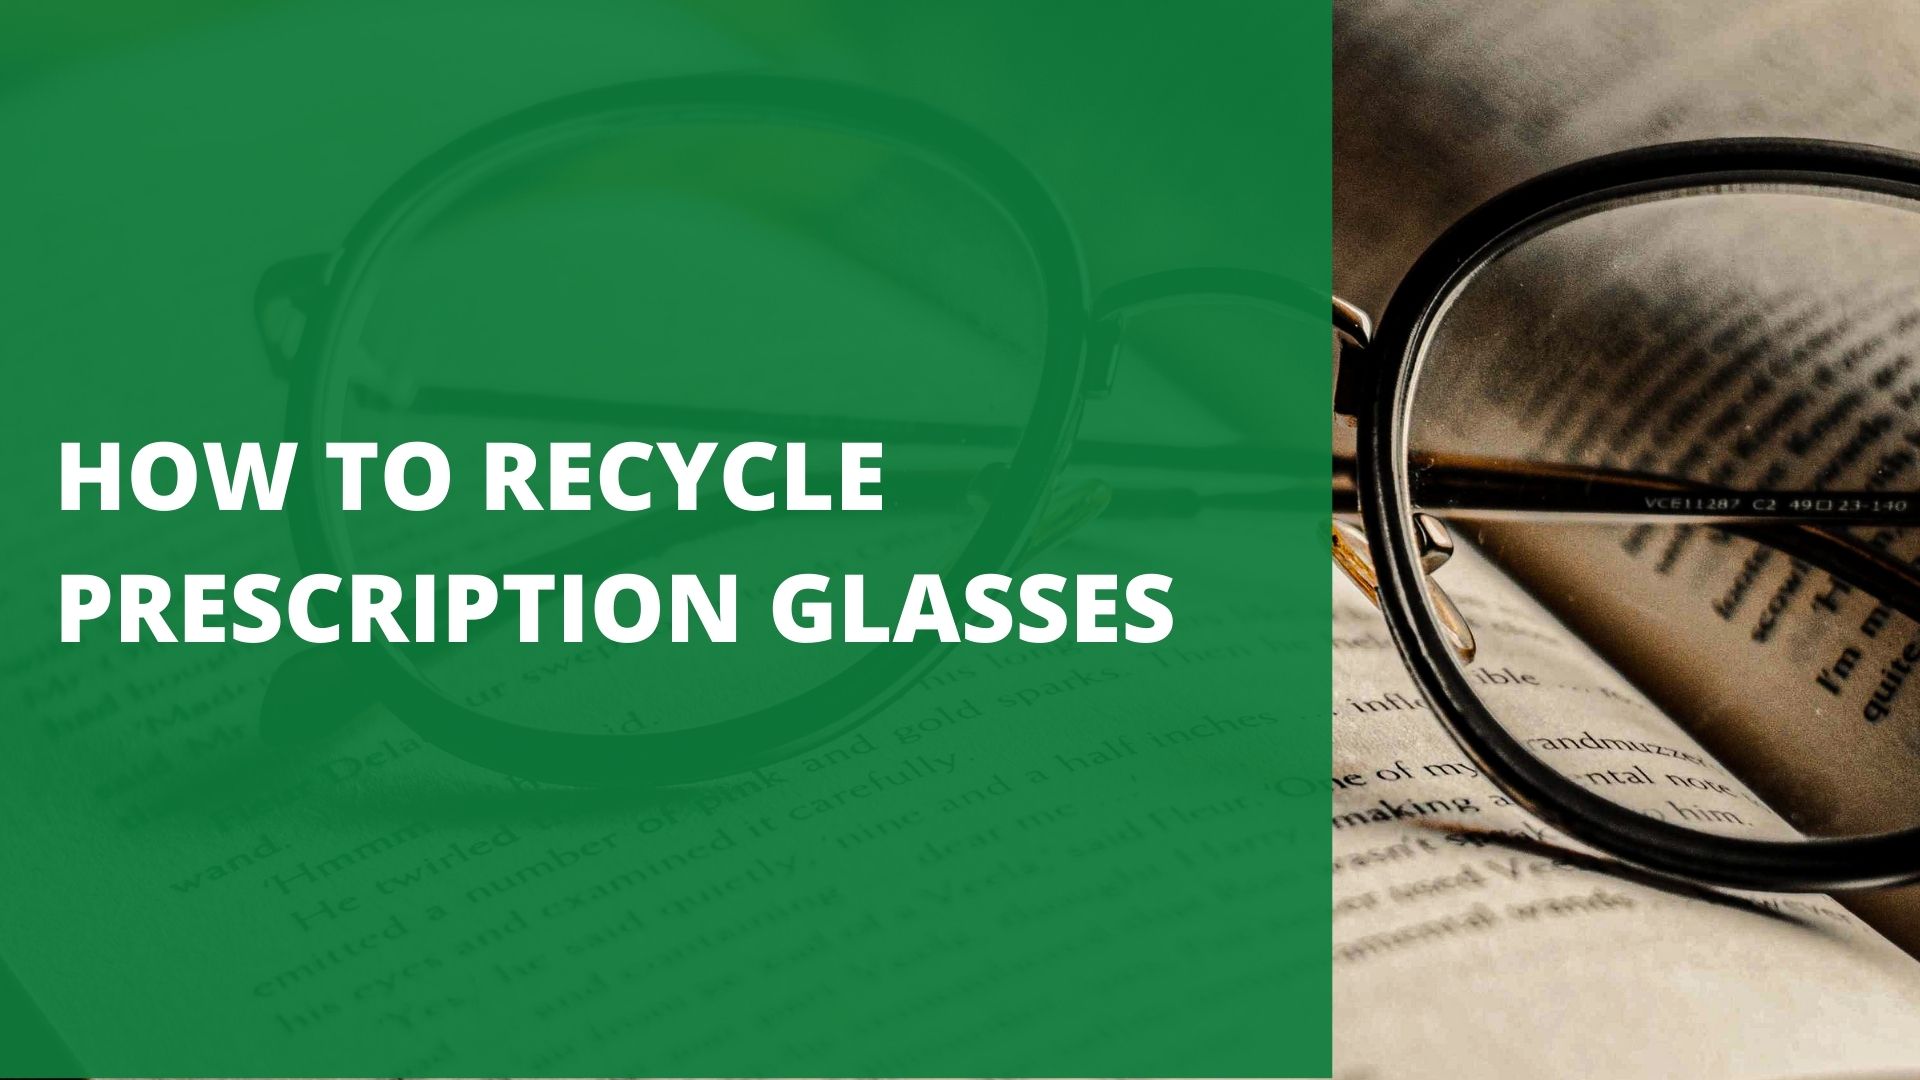 How to Recycle Prescription Glasses